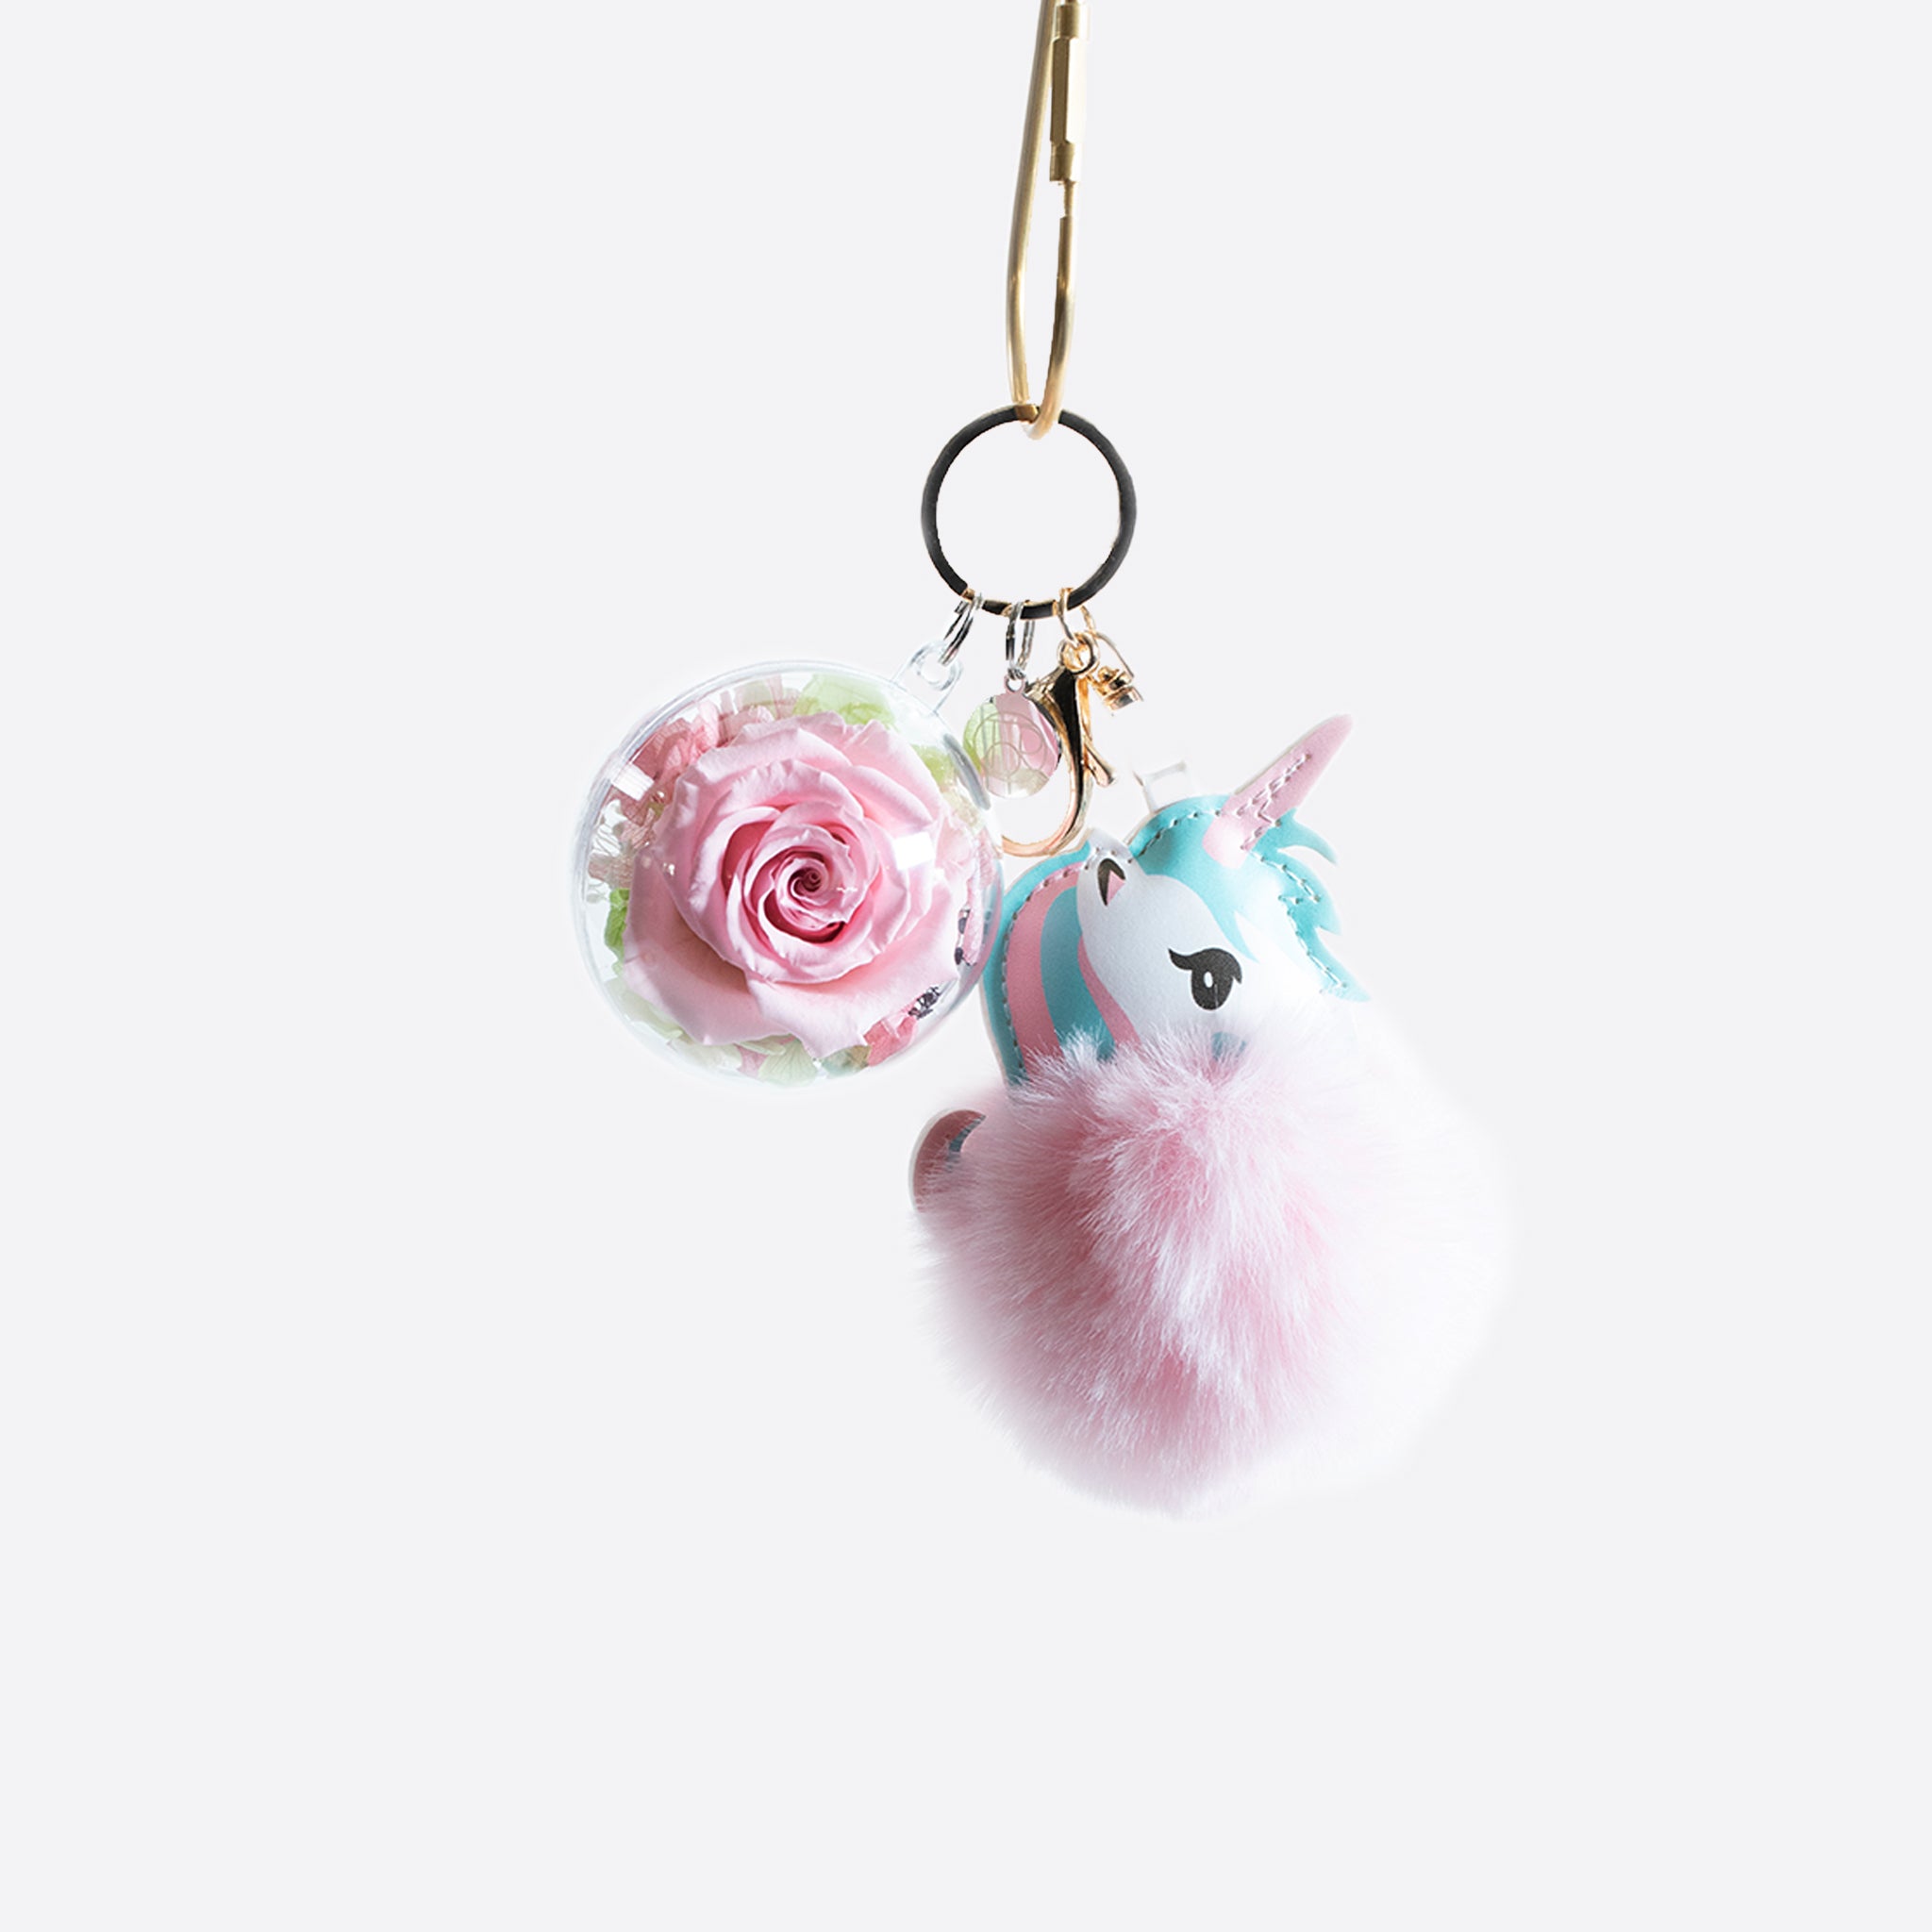 The Only Roses Everlasting Preserved Rose Unicorn Figure Keychain